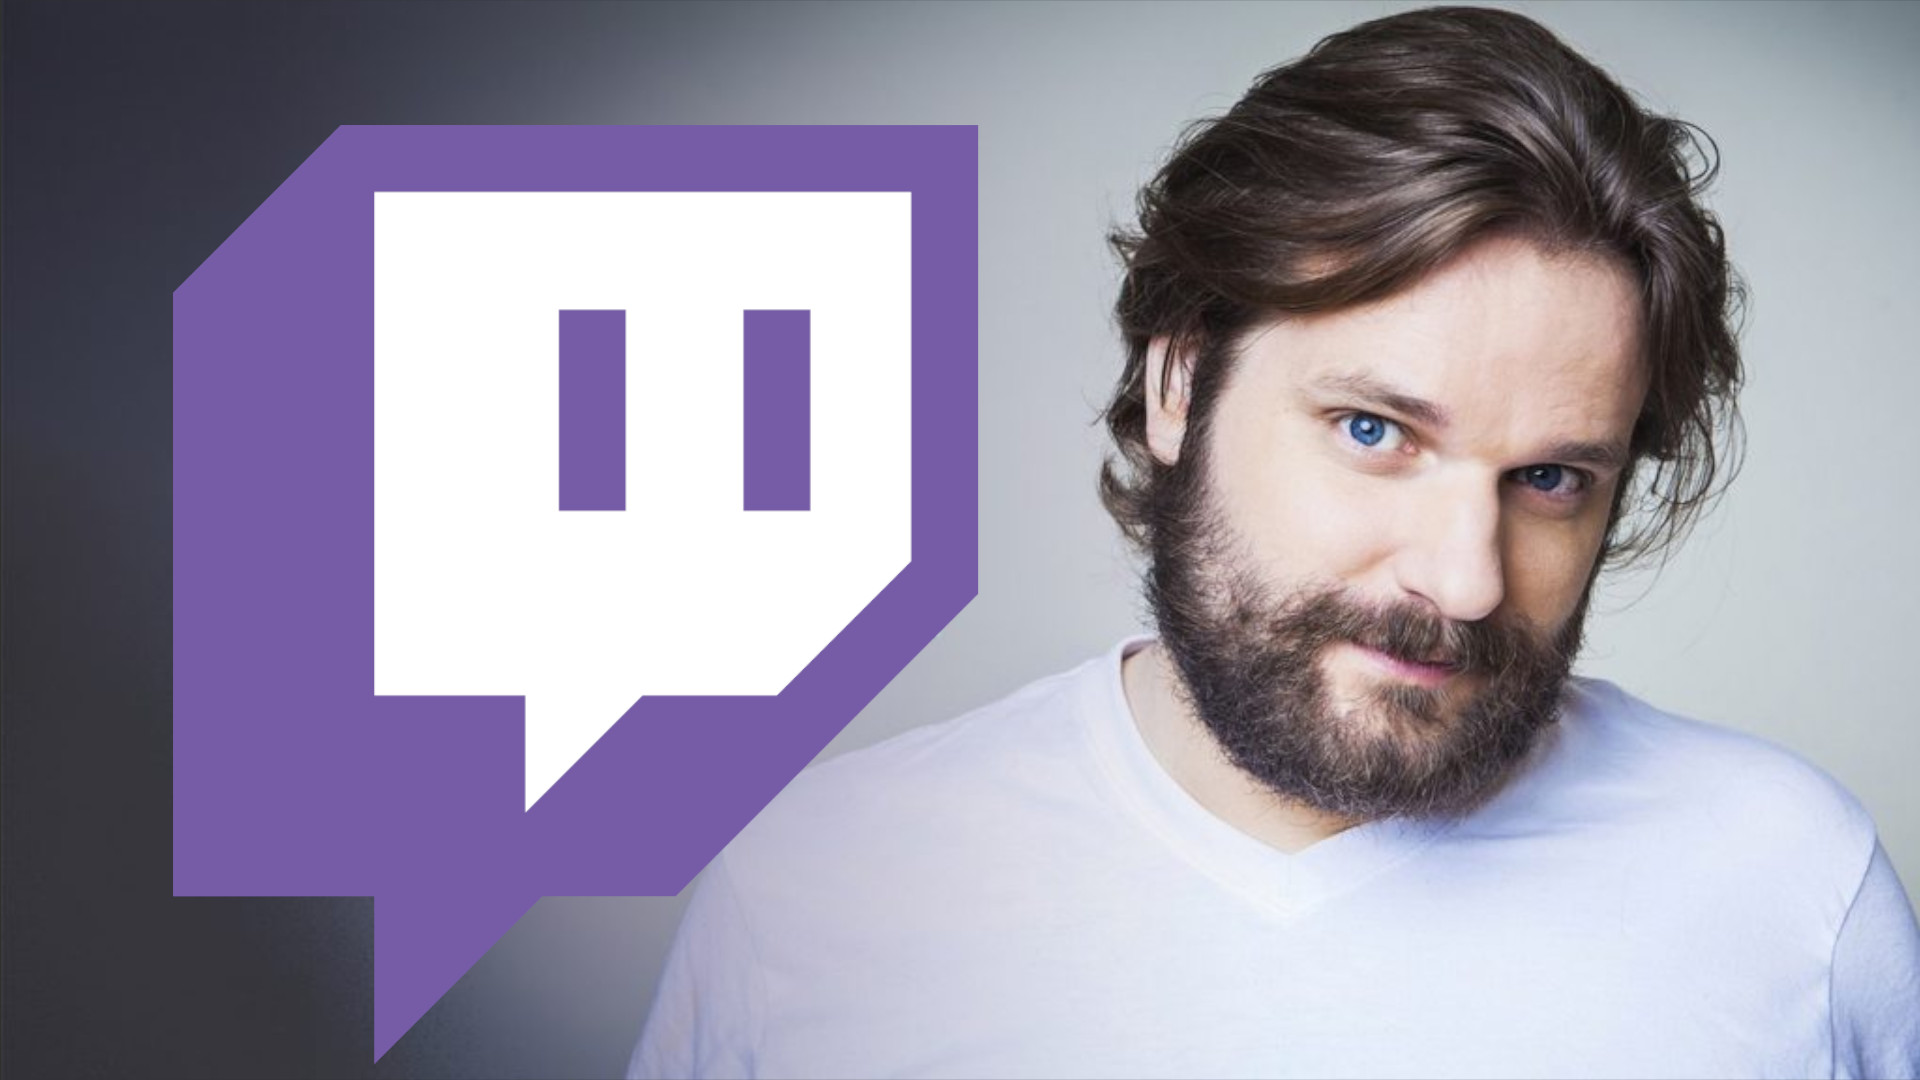 Gronkh shows a call for donations on Twitch, within 15 minutes more than €14,000 is raised